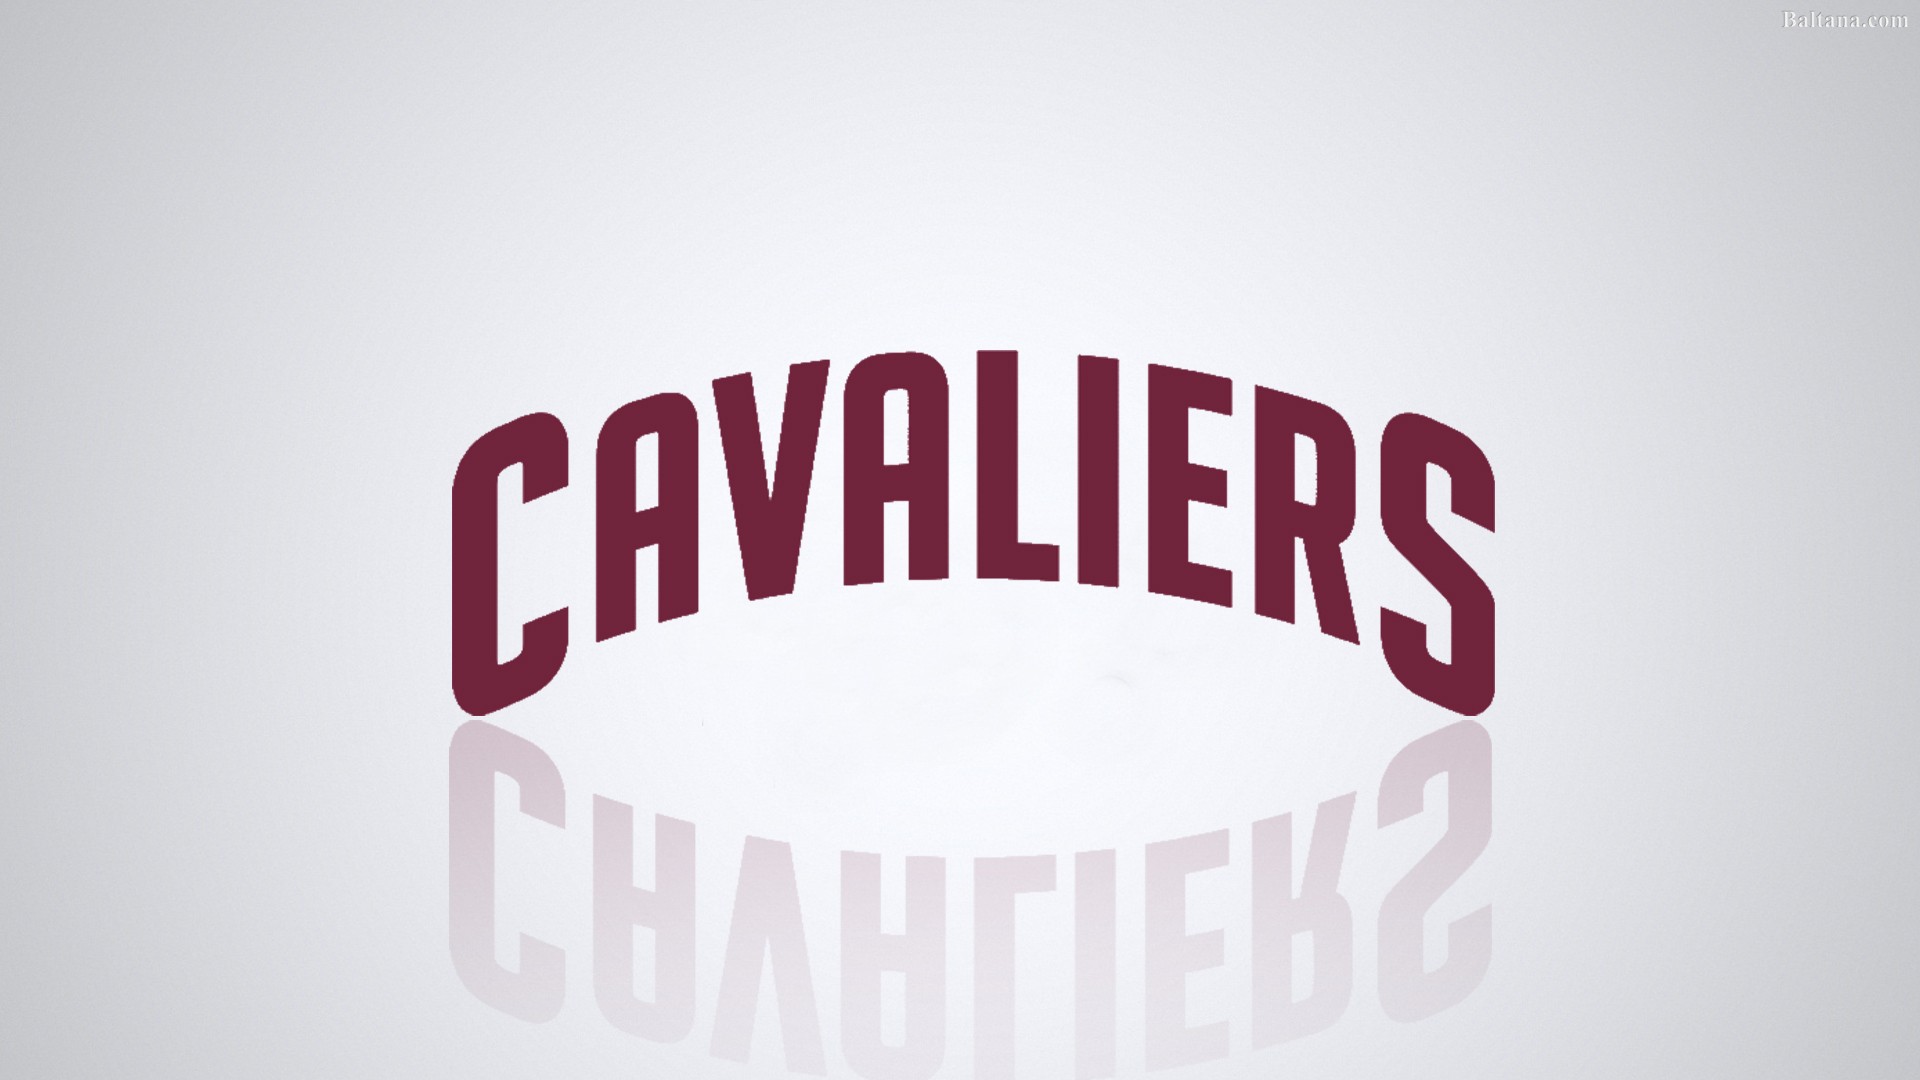 Cleveland Cavaliers Background Wallpaper - Graphic Design , HD Wallpaper & Backgrounds